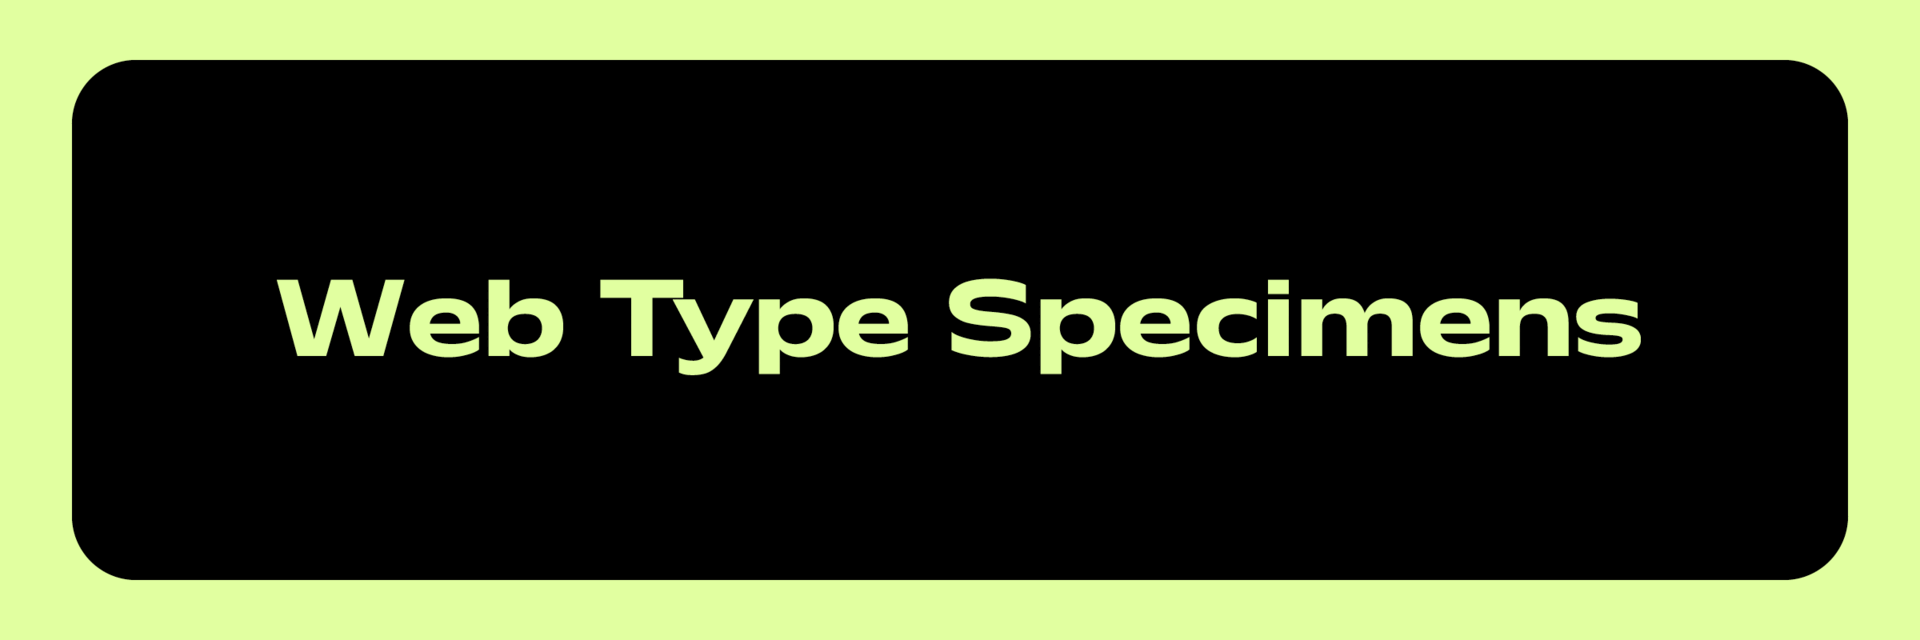 Type Specimens on the Web with Marie Otsuka